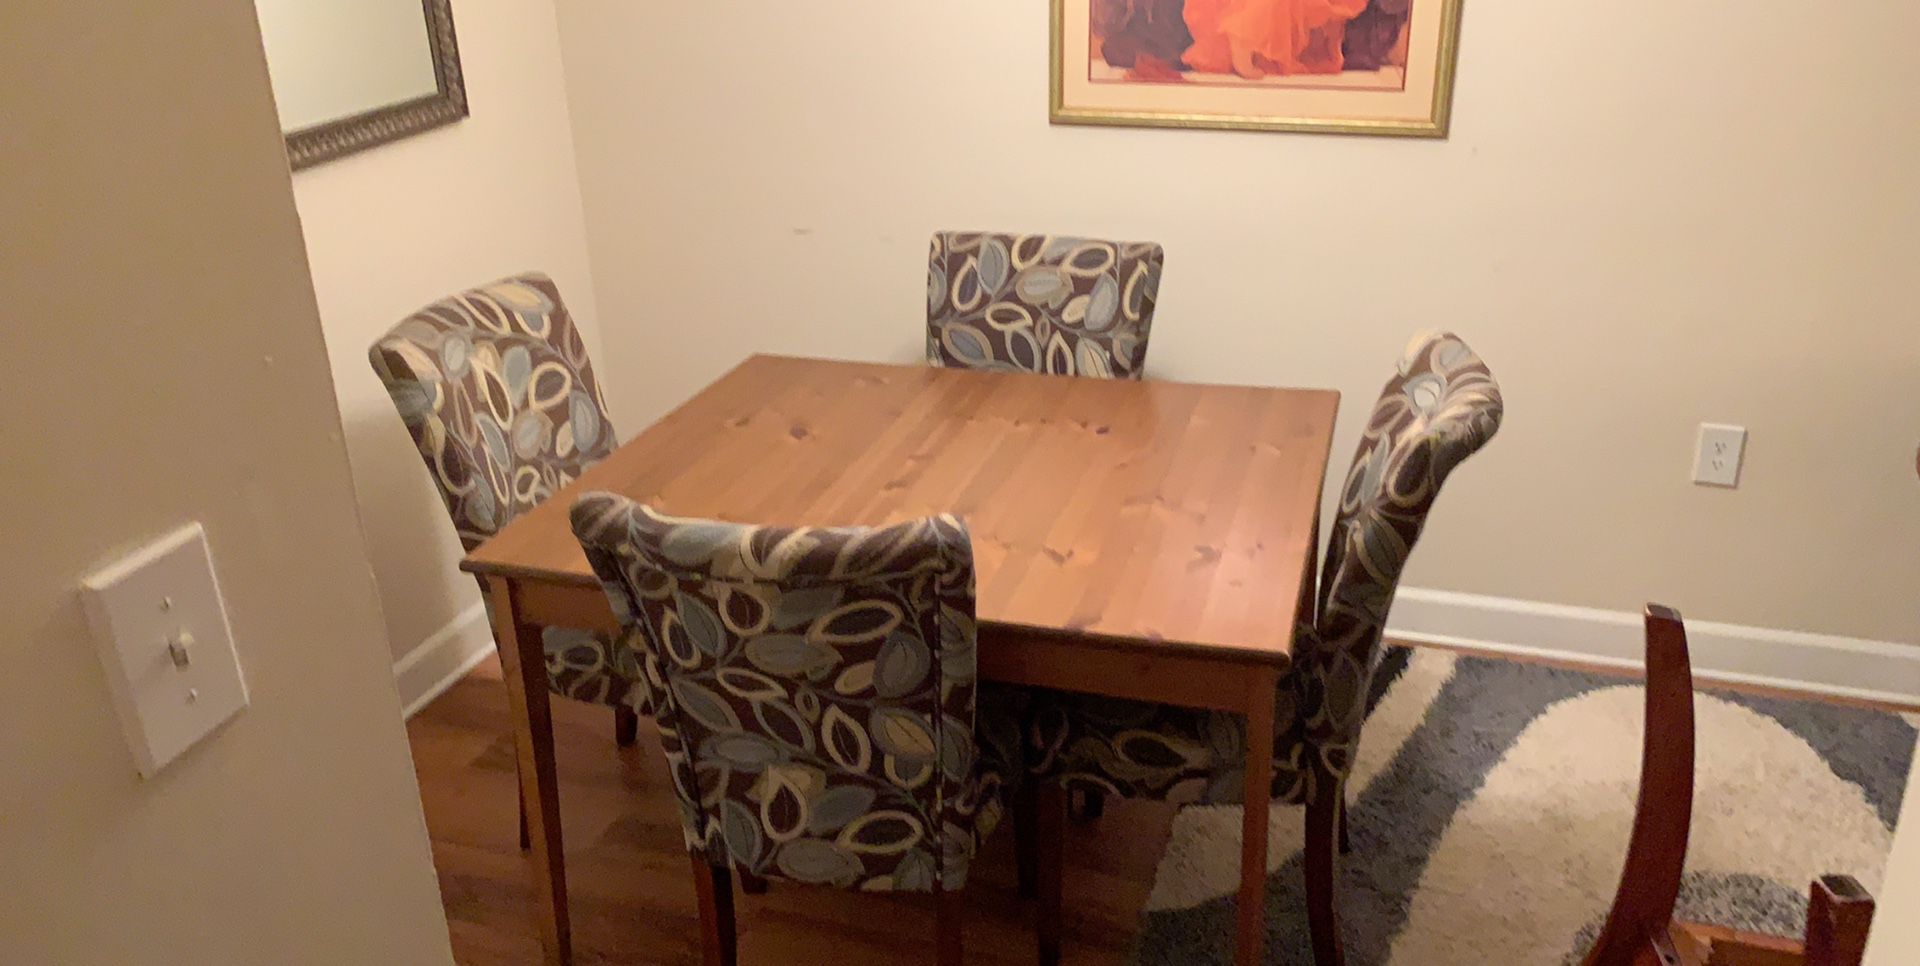 Dining table 4 chairs